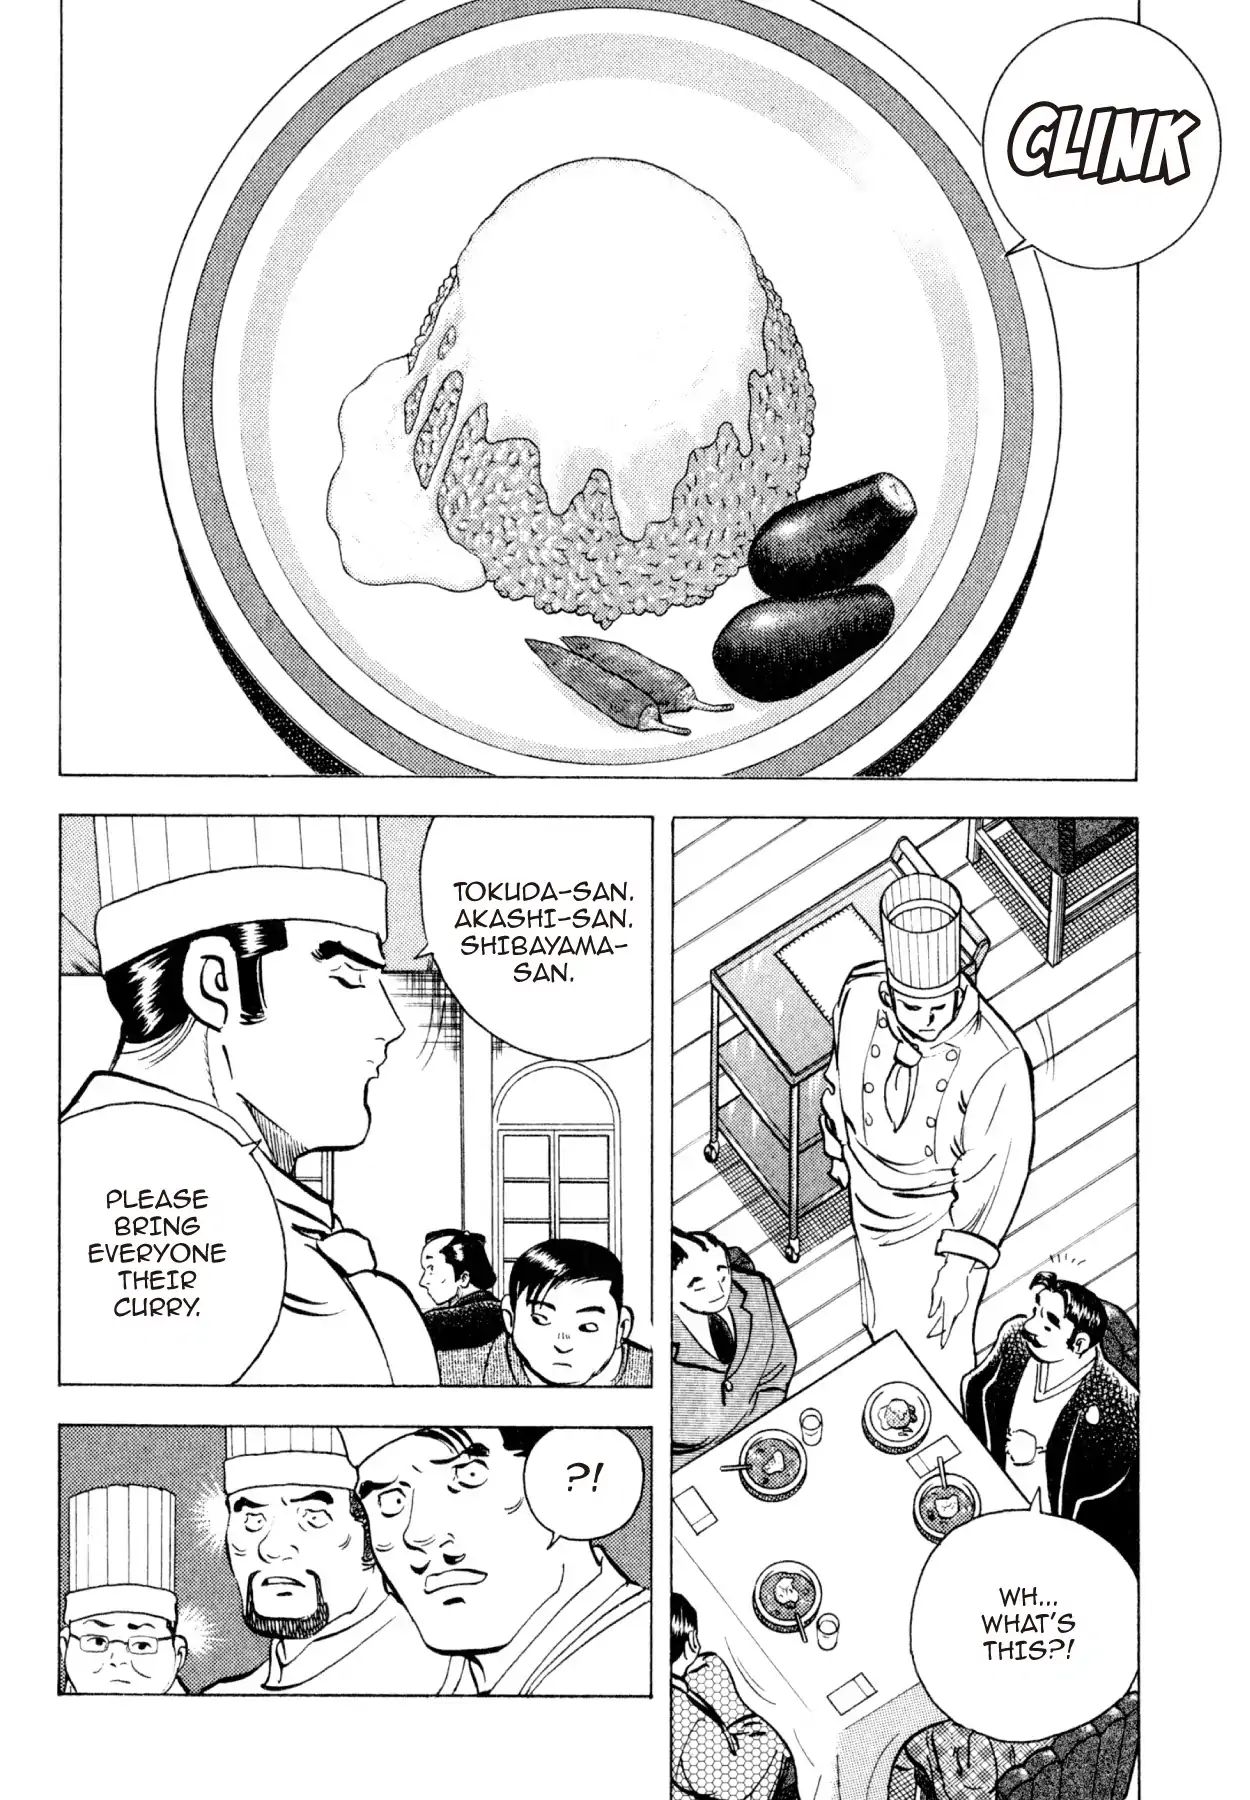 Shoku King VOL.25 CHAPTER 231: THE KIND OF CURRY